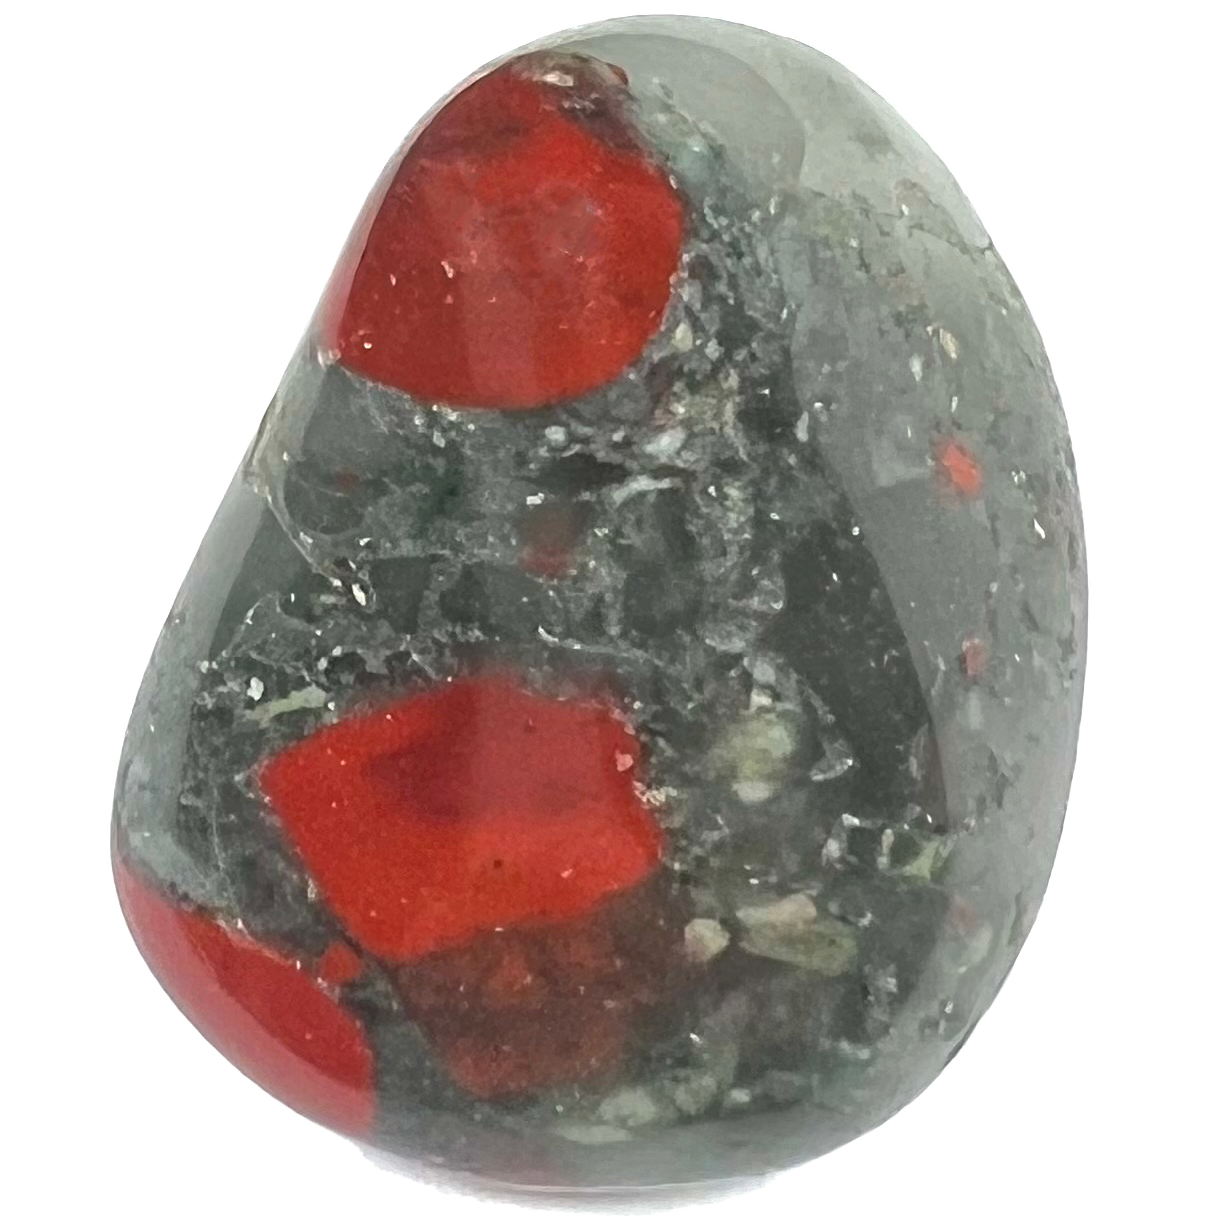 A tumbled bloodstone from Africa.  The stone is dark, transluscent forest green with opaque red jasper spots.